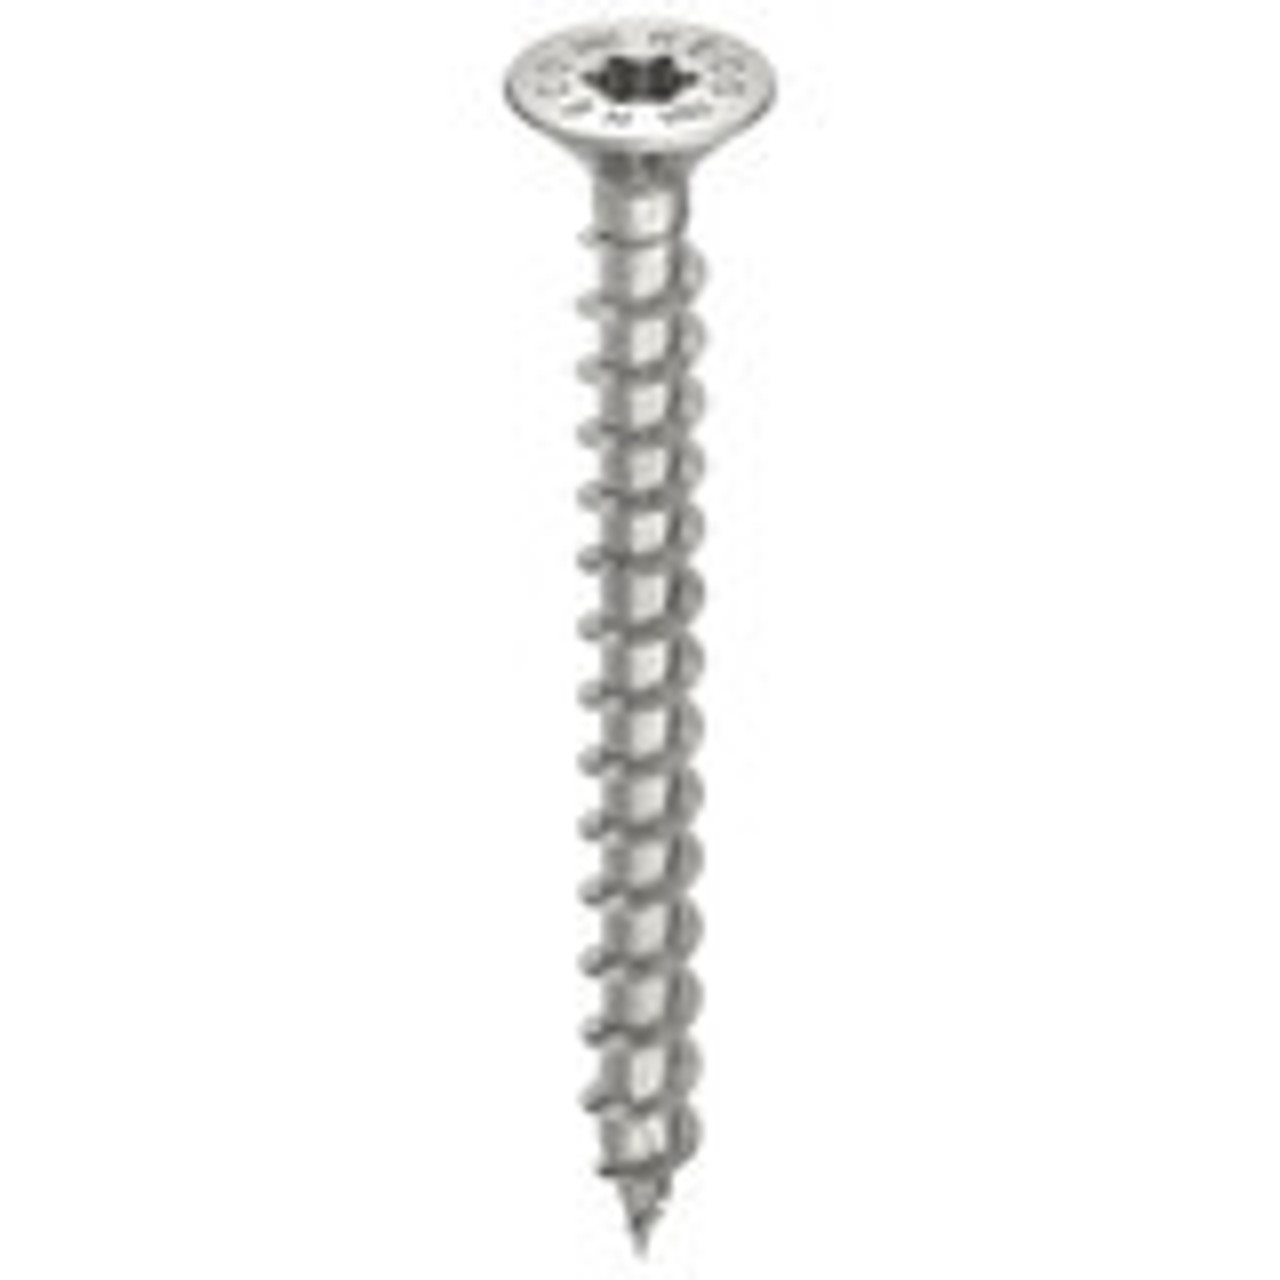 HECO Countersunk Head Screws | Find near me 4.5mm Countersunk Head Screws for Outdoor Screws and Façade screws with HD20 Drive